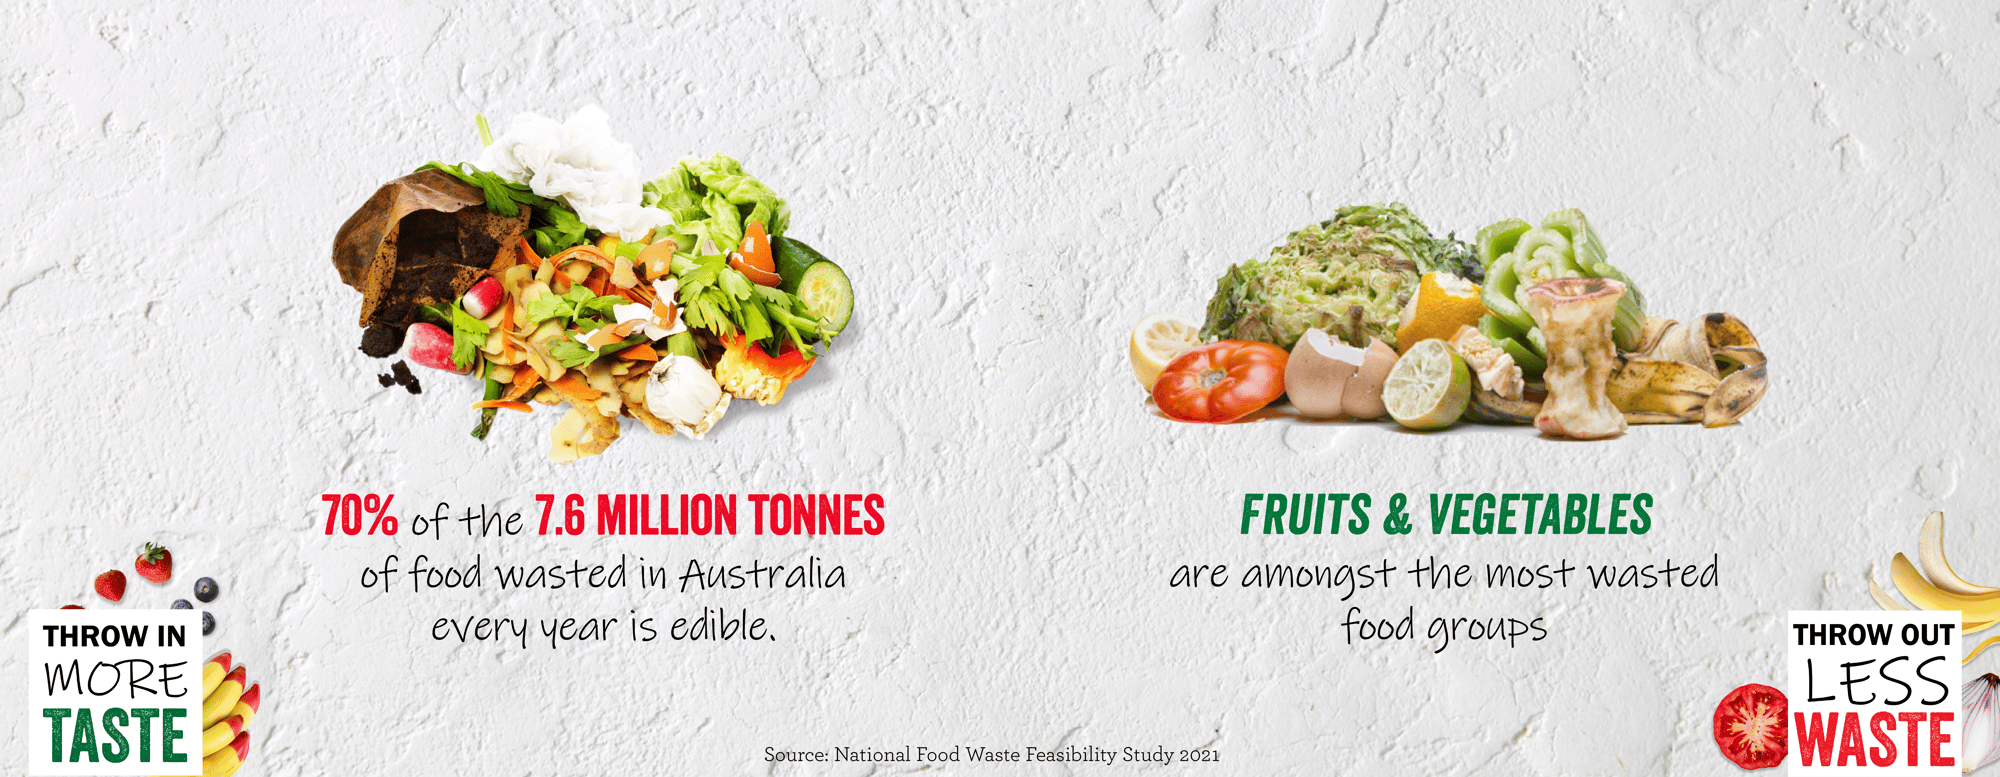 Food Waste Infographic - Banners-04